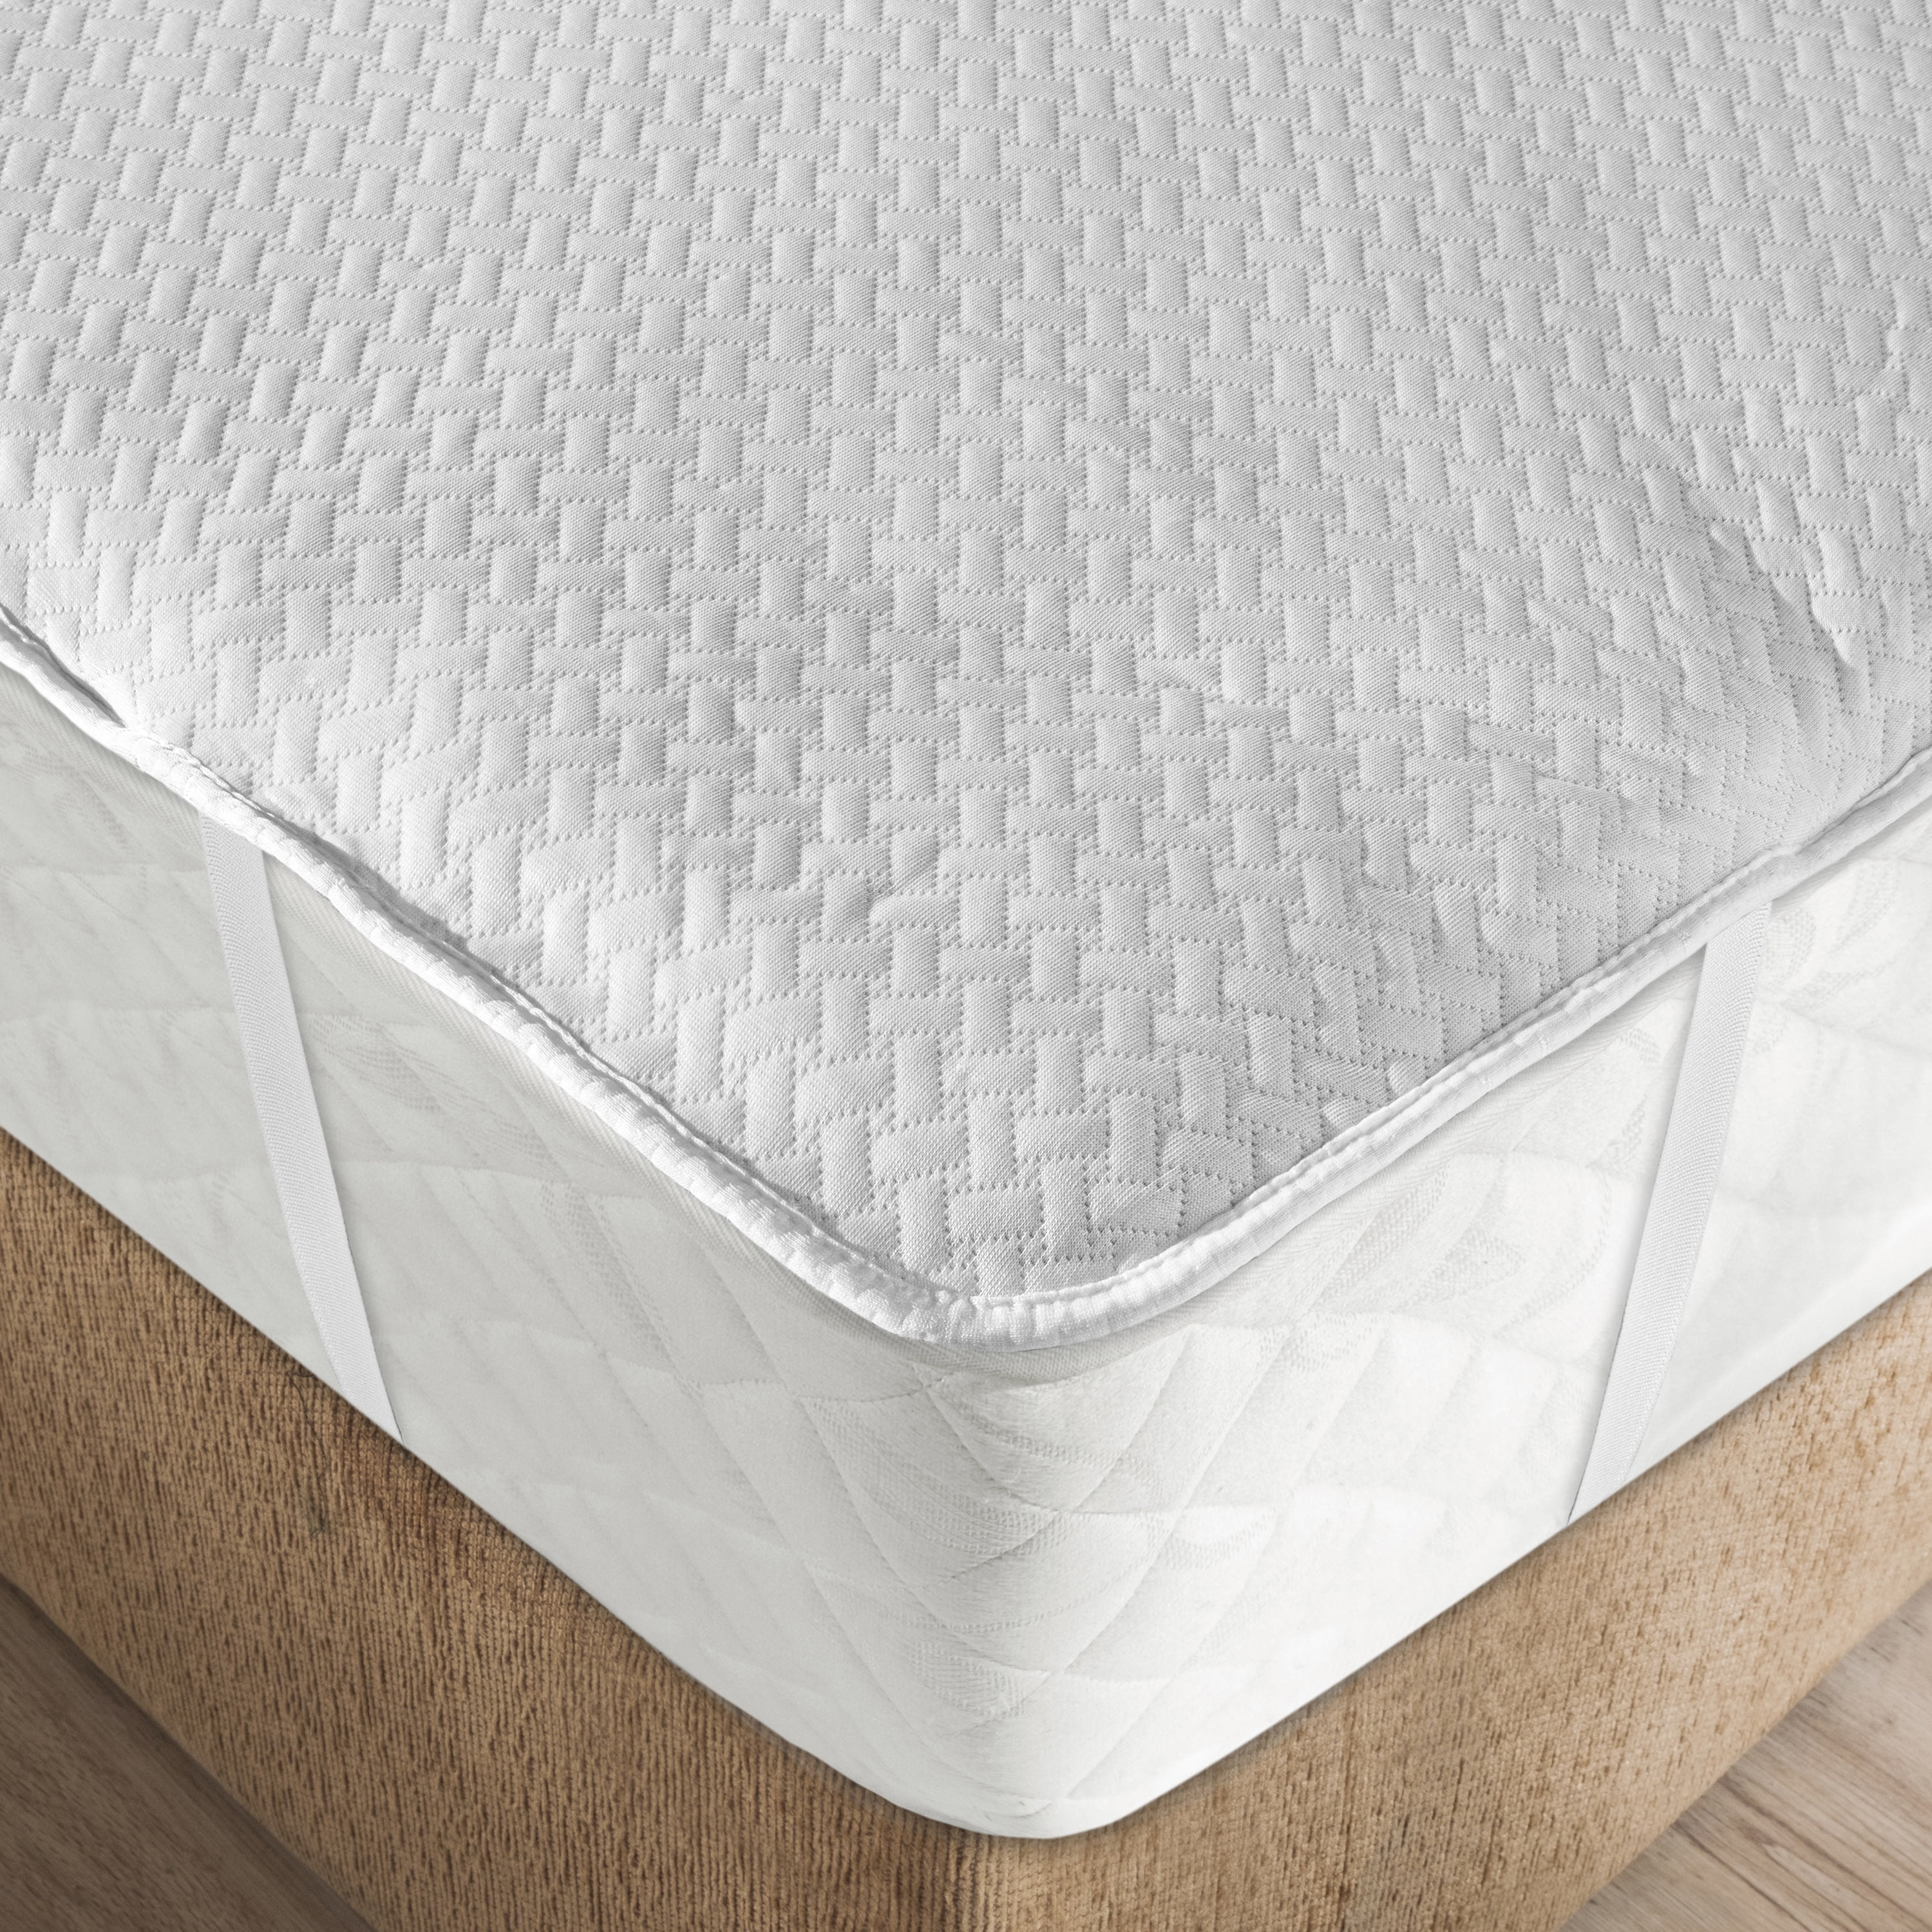 NEW QUILTED MATTRESS PROTECTOR  FITTED BED COVER ANTI ALLERGY ALL SIZES 